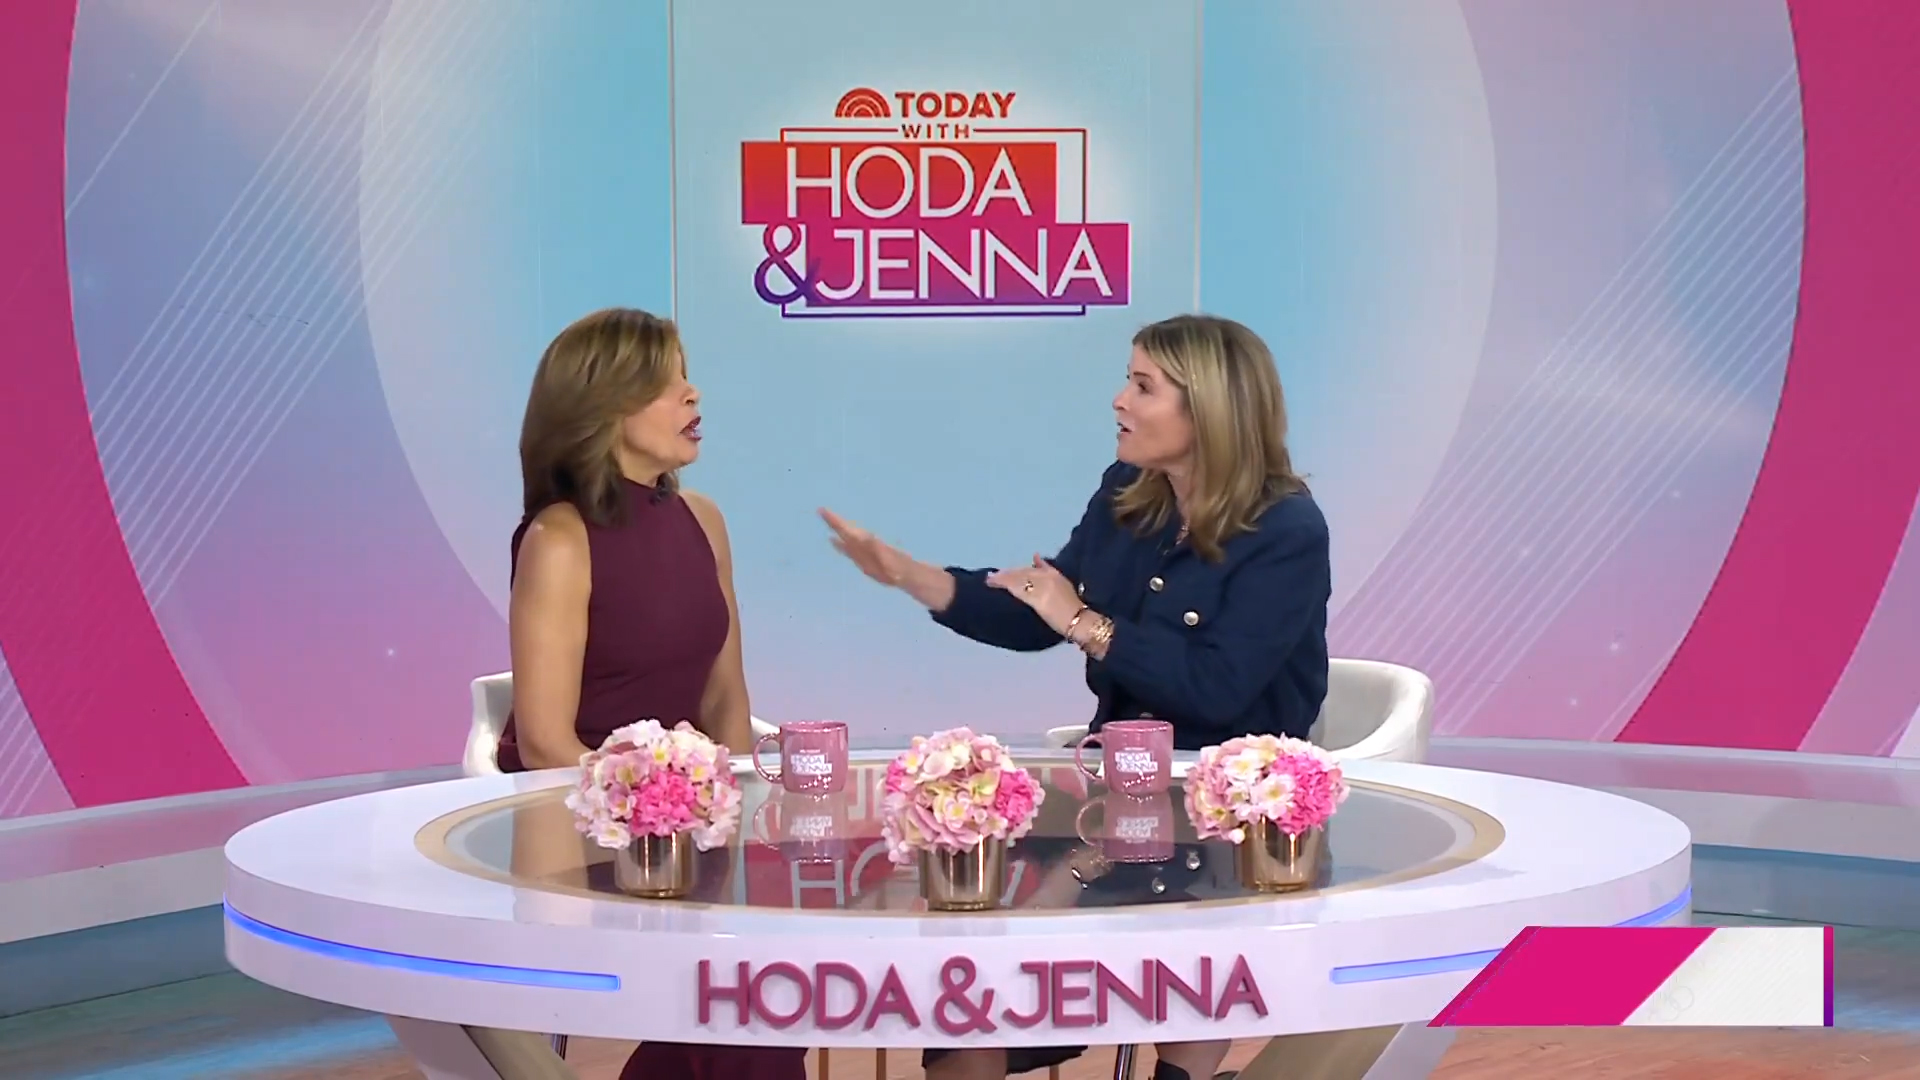 Jenna had to back-pedal when Hoda corrected her